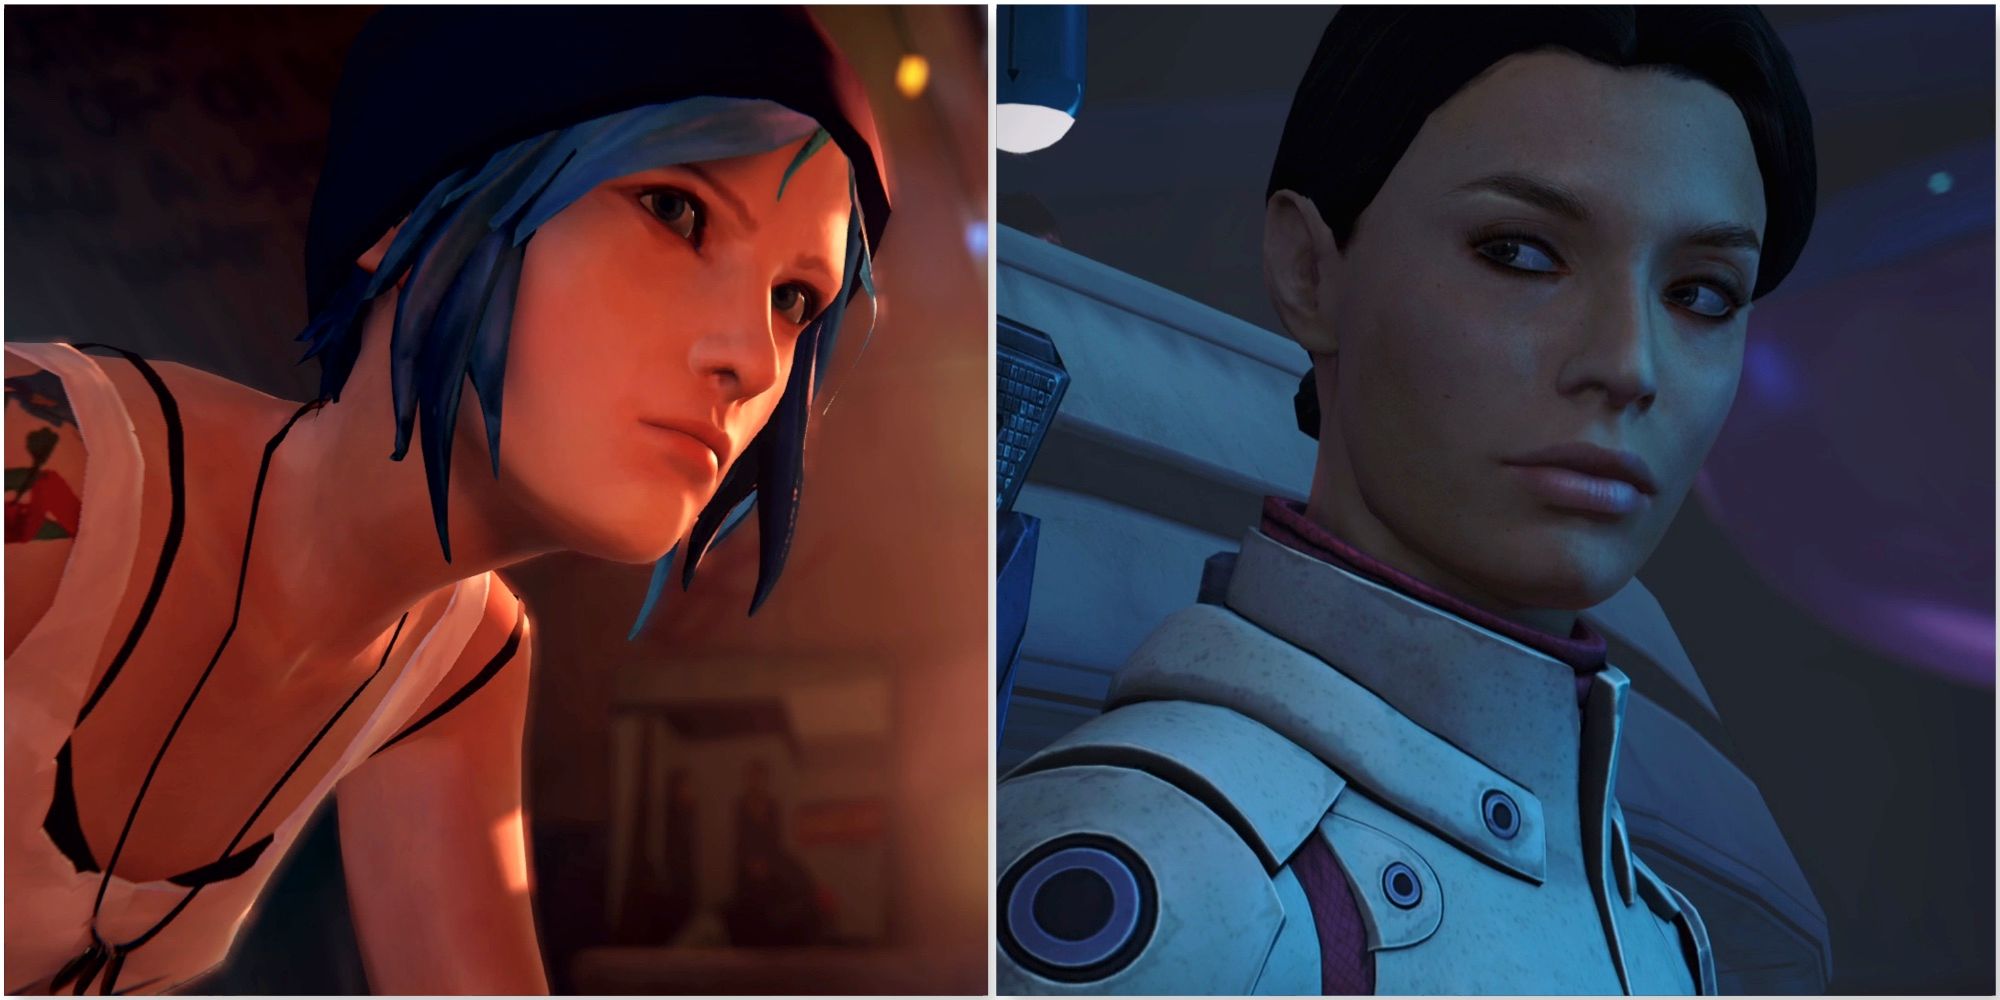 Chloe in Life Is Strange and Ashley in Mass Effect